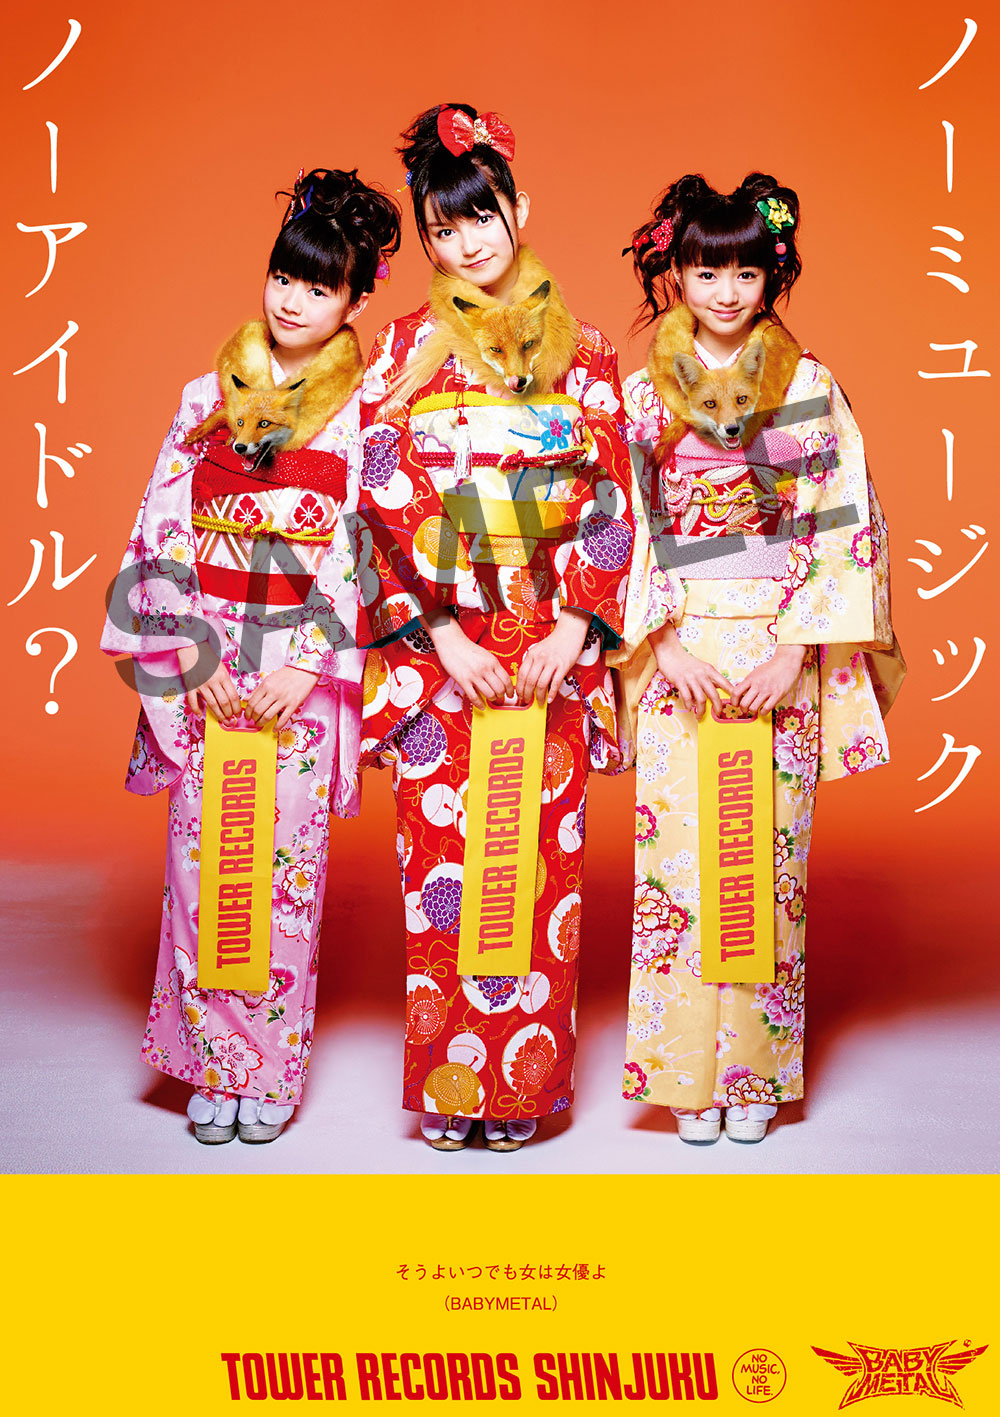 BABYMETAL Makes Appearance On Tower Records Poster In Kimono!